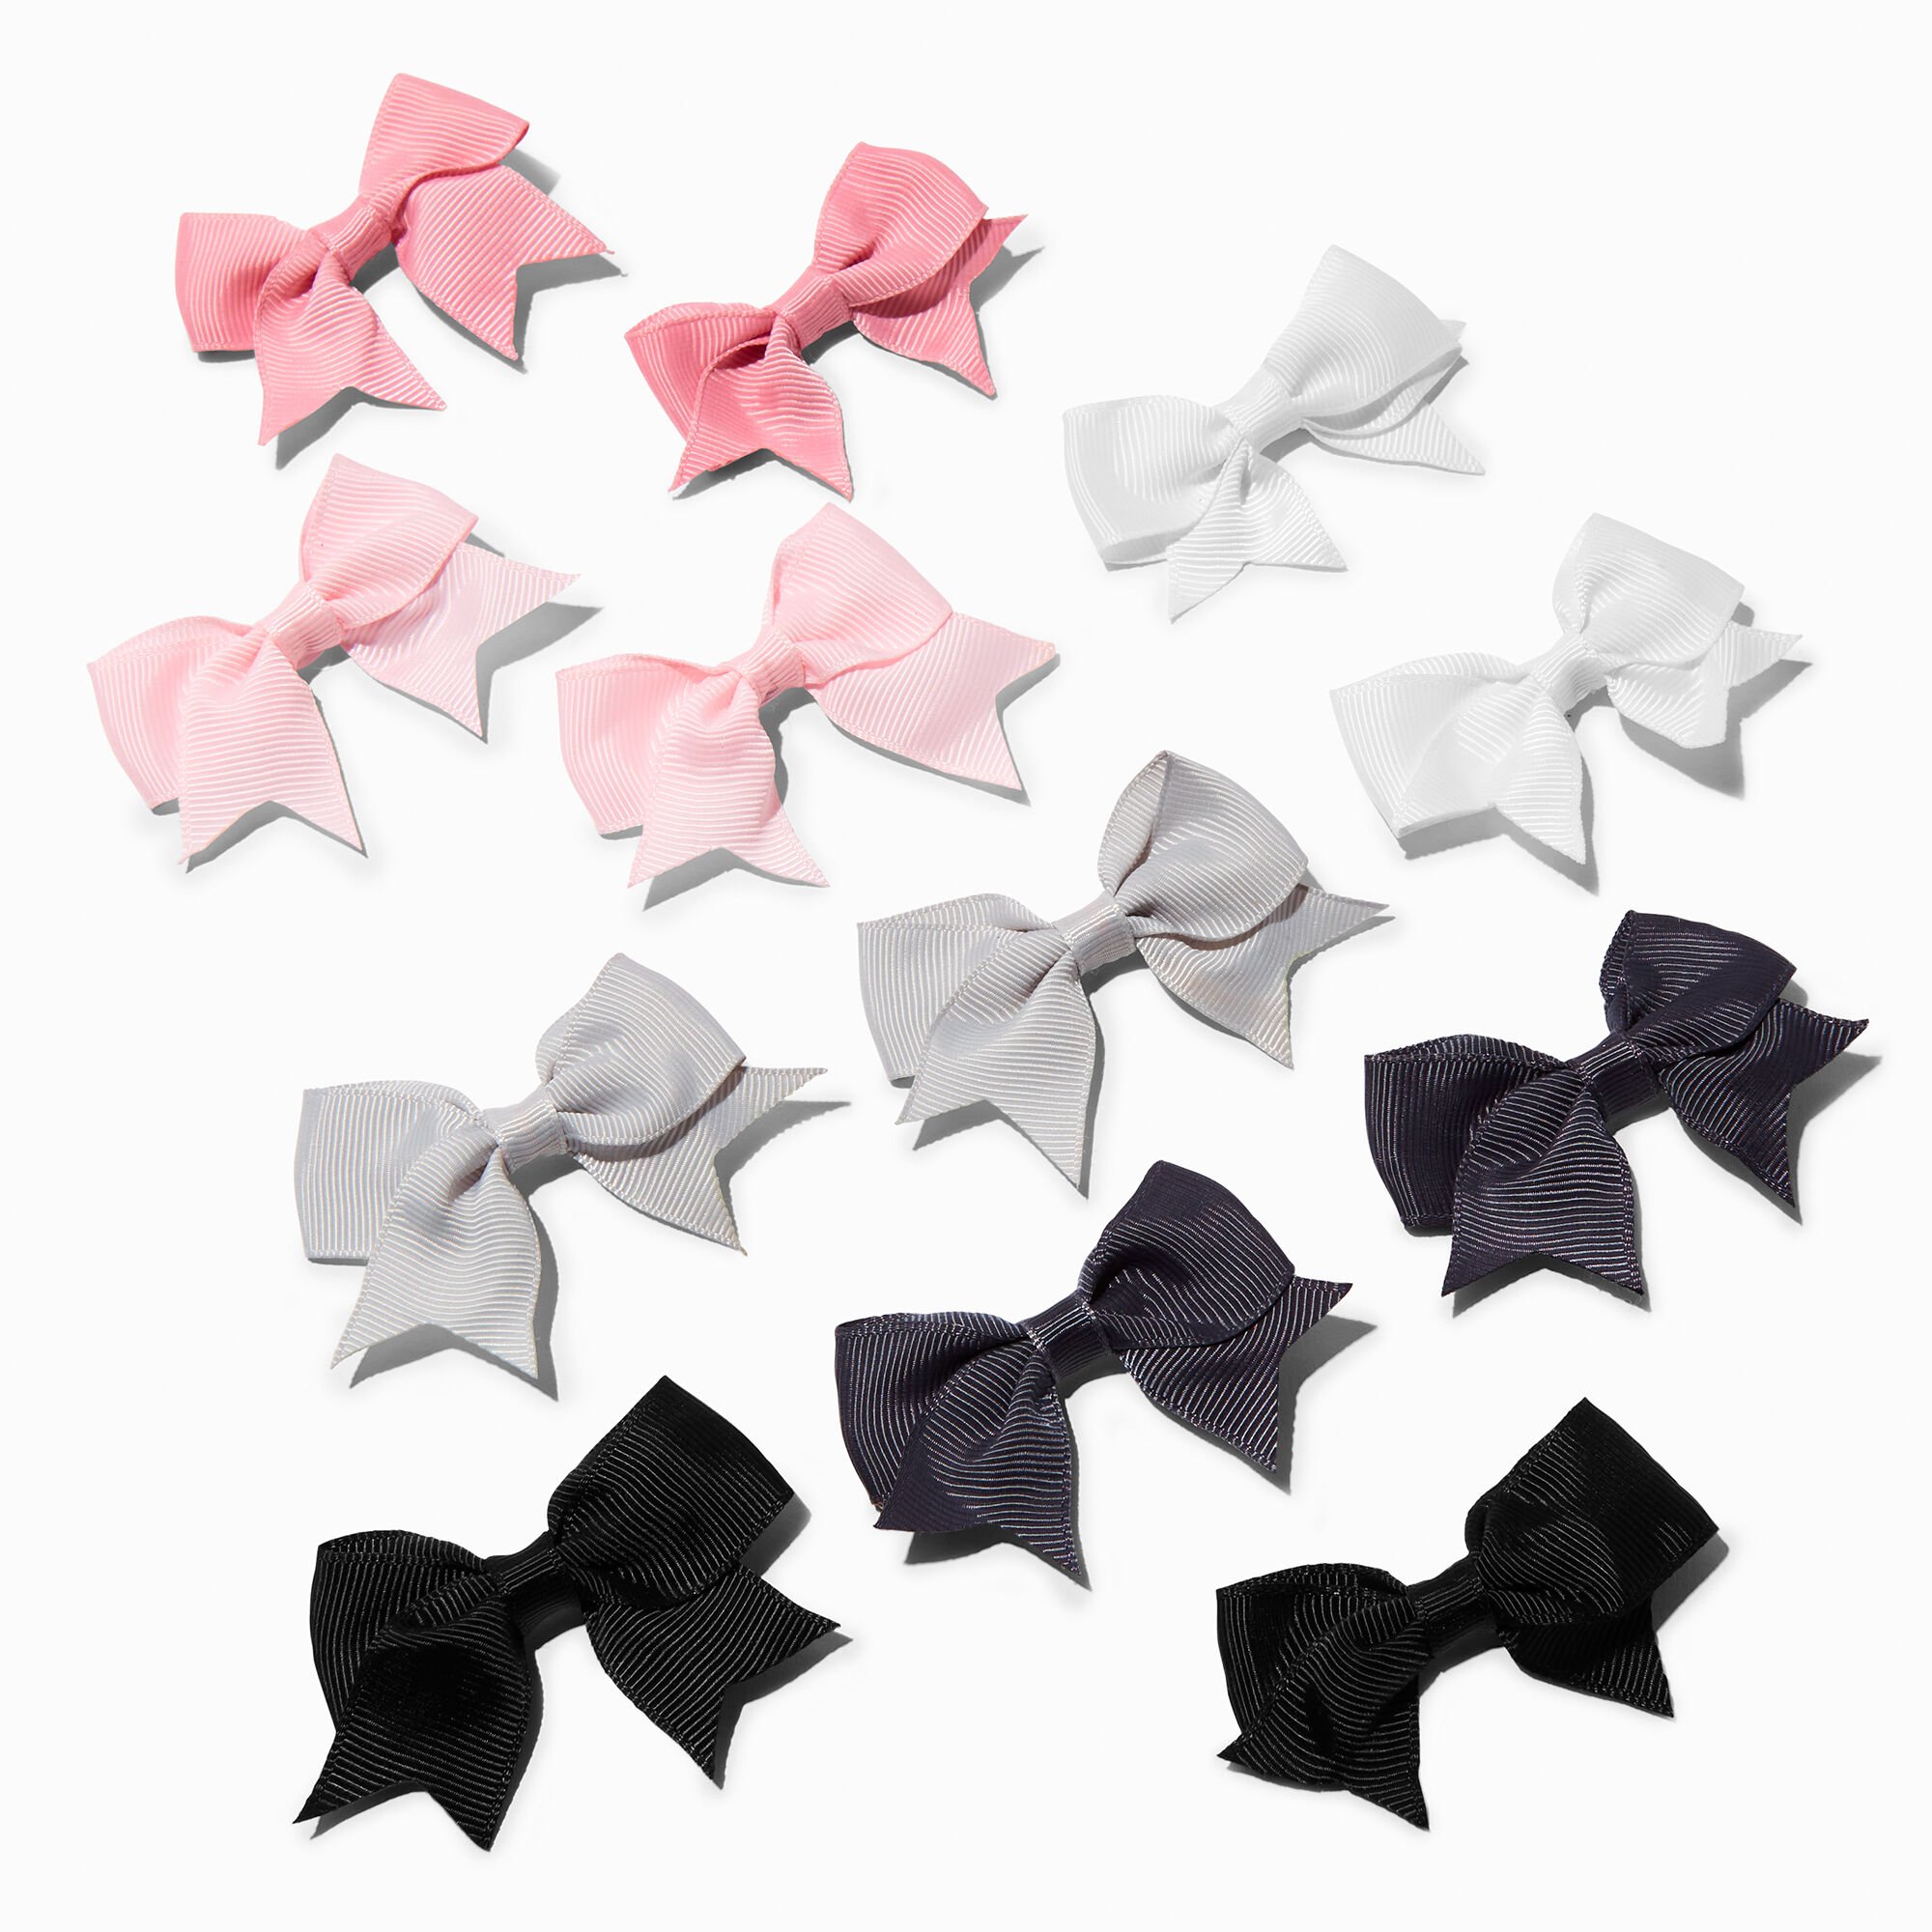 View Claires Club Edgy Mini Hair Bow Clips 12 Pack information